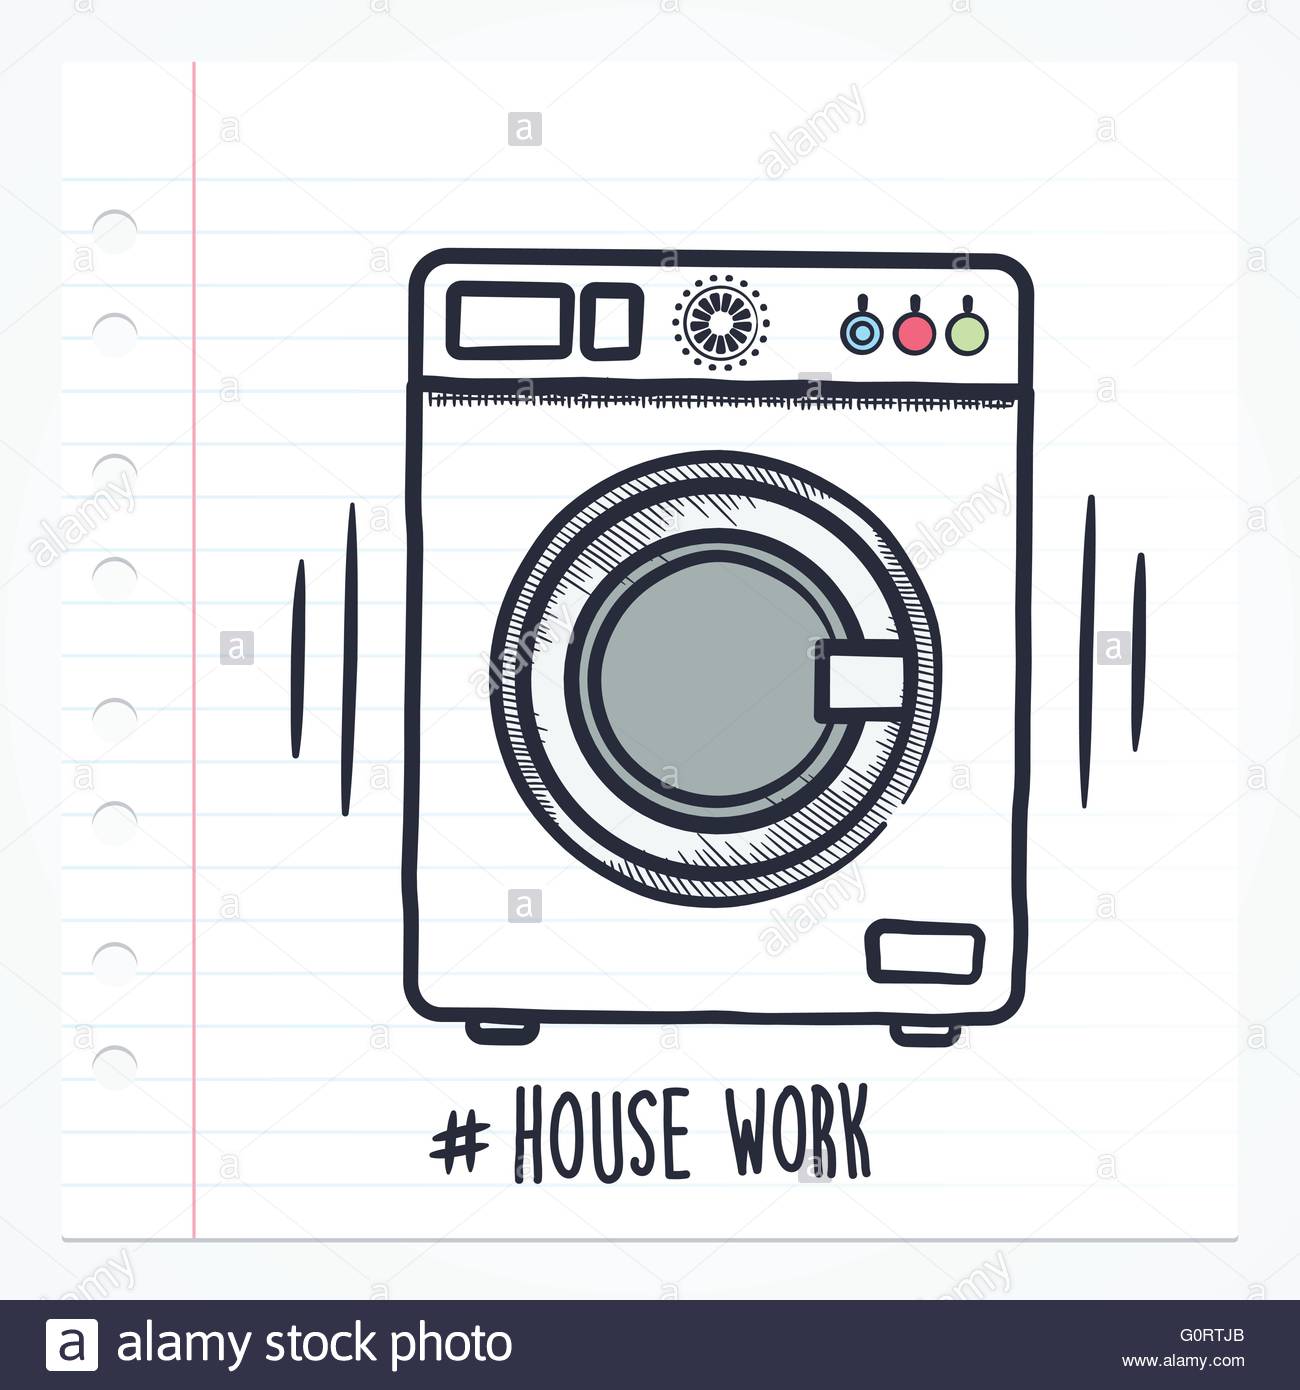 Download Washing Machine Drawing at GetDrawings.com | Free for personal use Washing Machine Drawing of ...